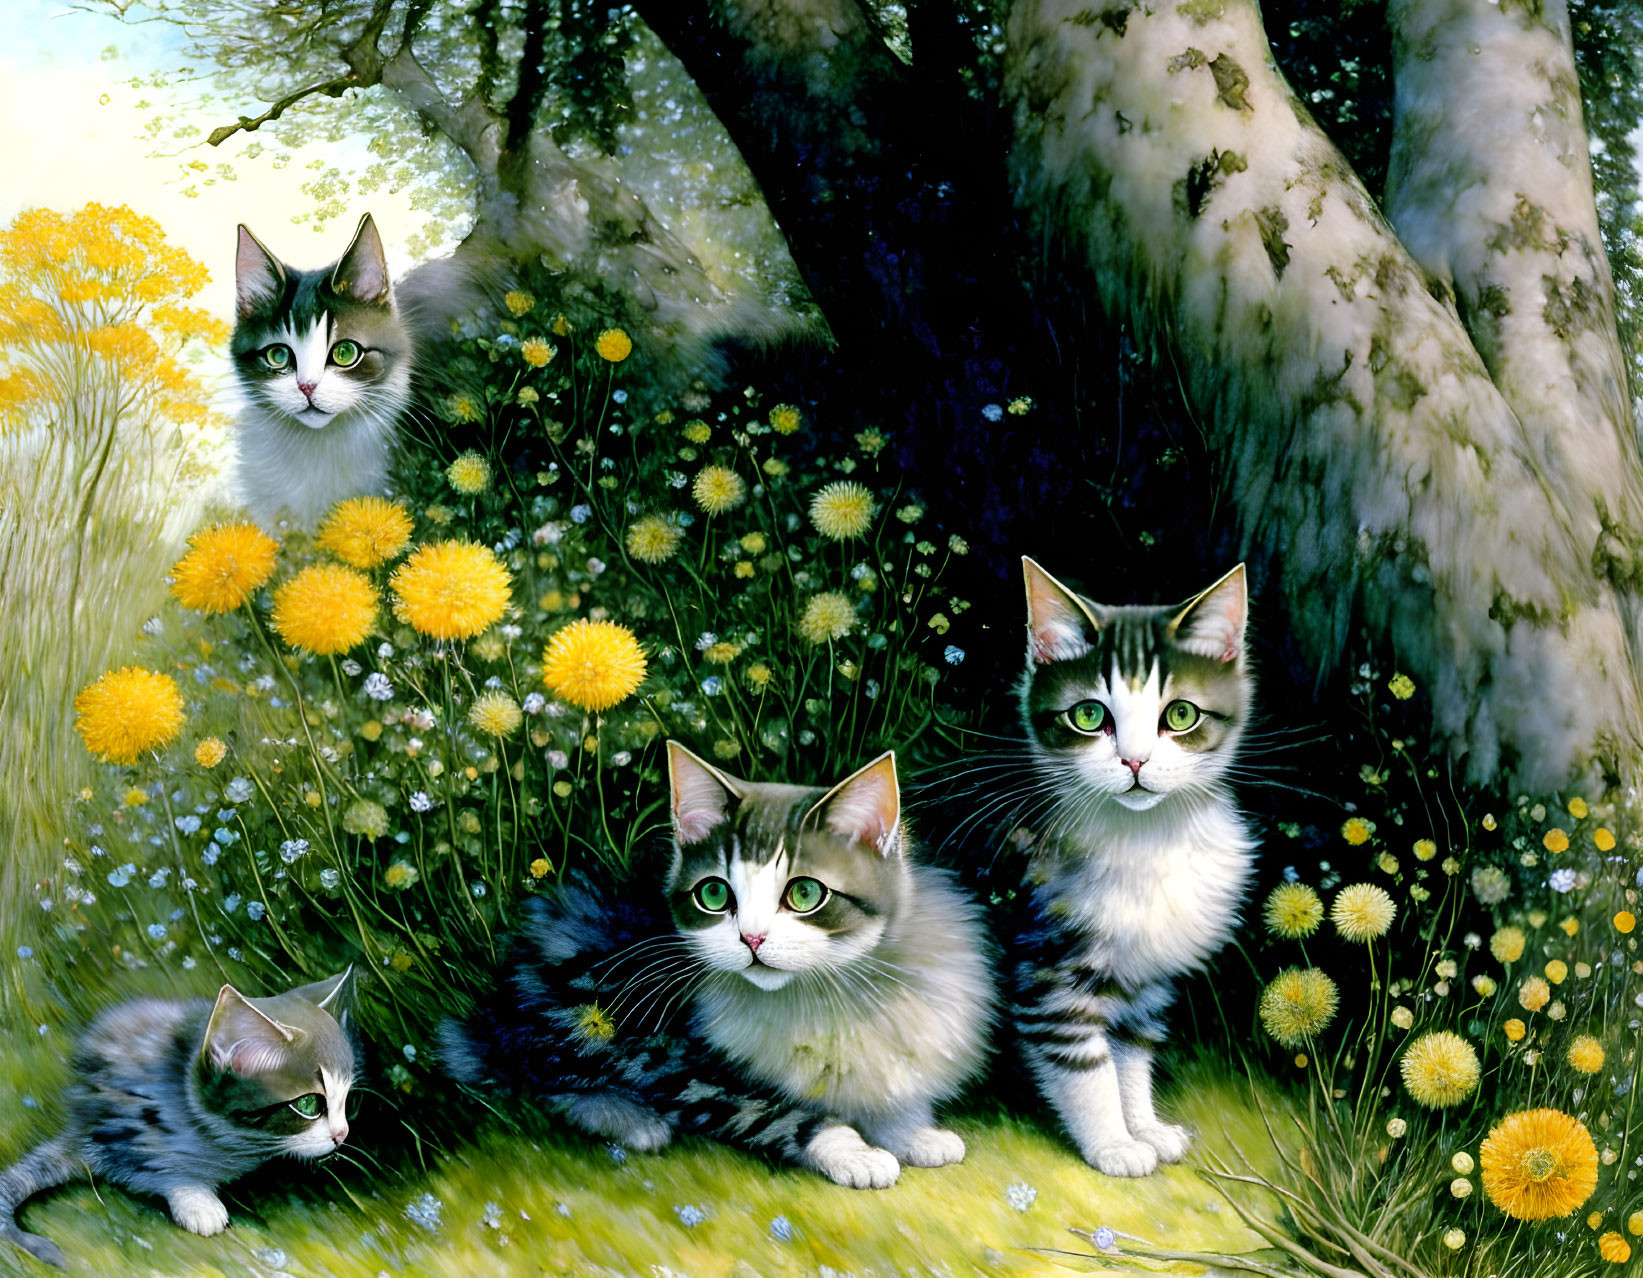 Four kittens in vibrant floral setting with dandelions, grass, and sunlight under tree